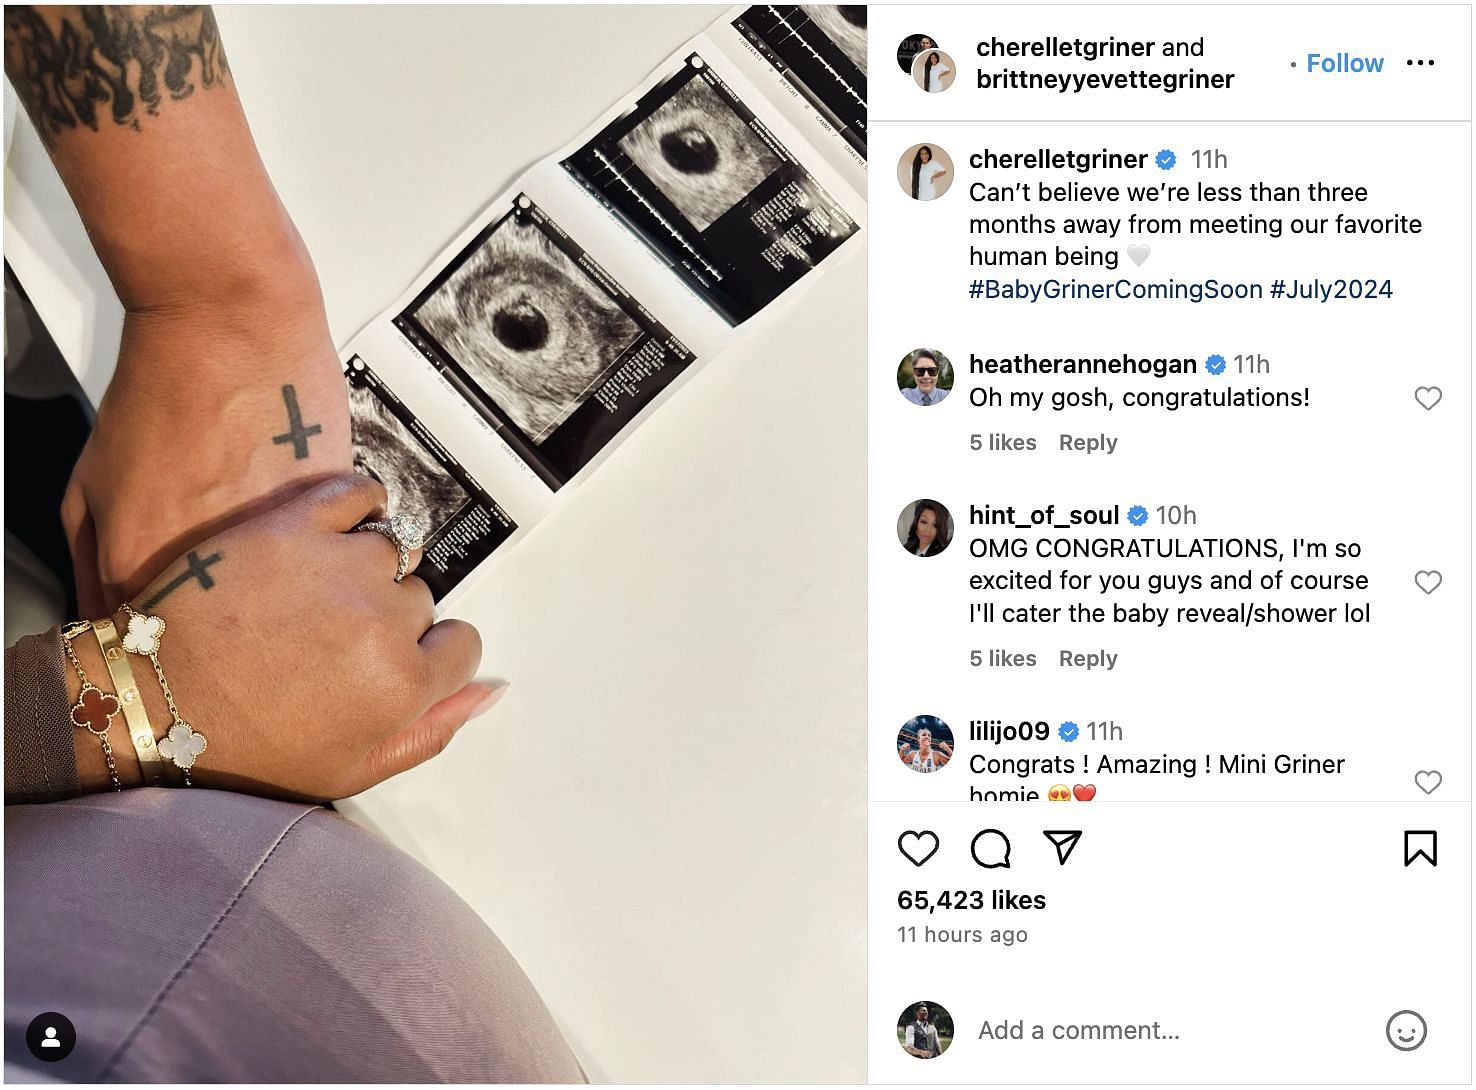 WNBA stars Meg Walker and Olympics basketball icon Carpr&eacute;aux Marjorie shared their thoughts about Brittney Griner&#039;s baby news